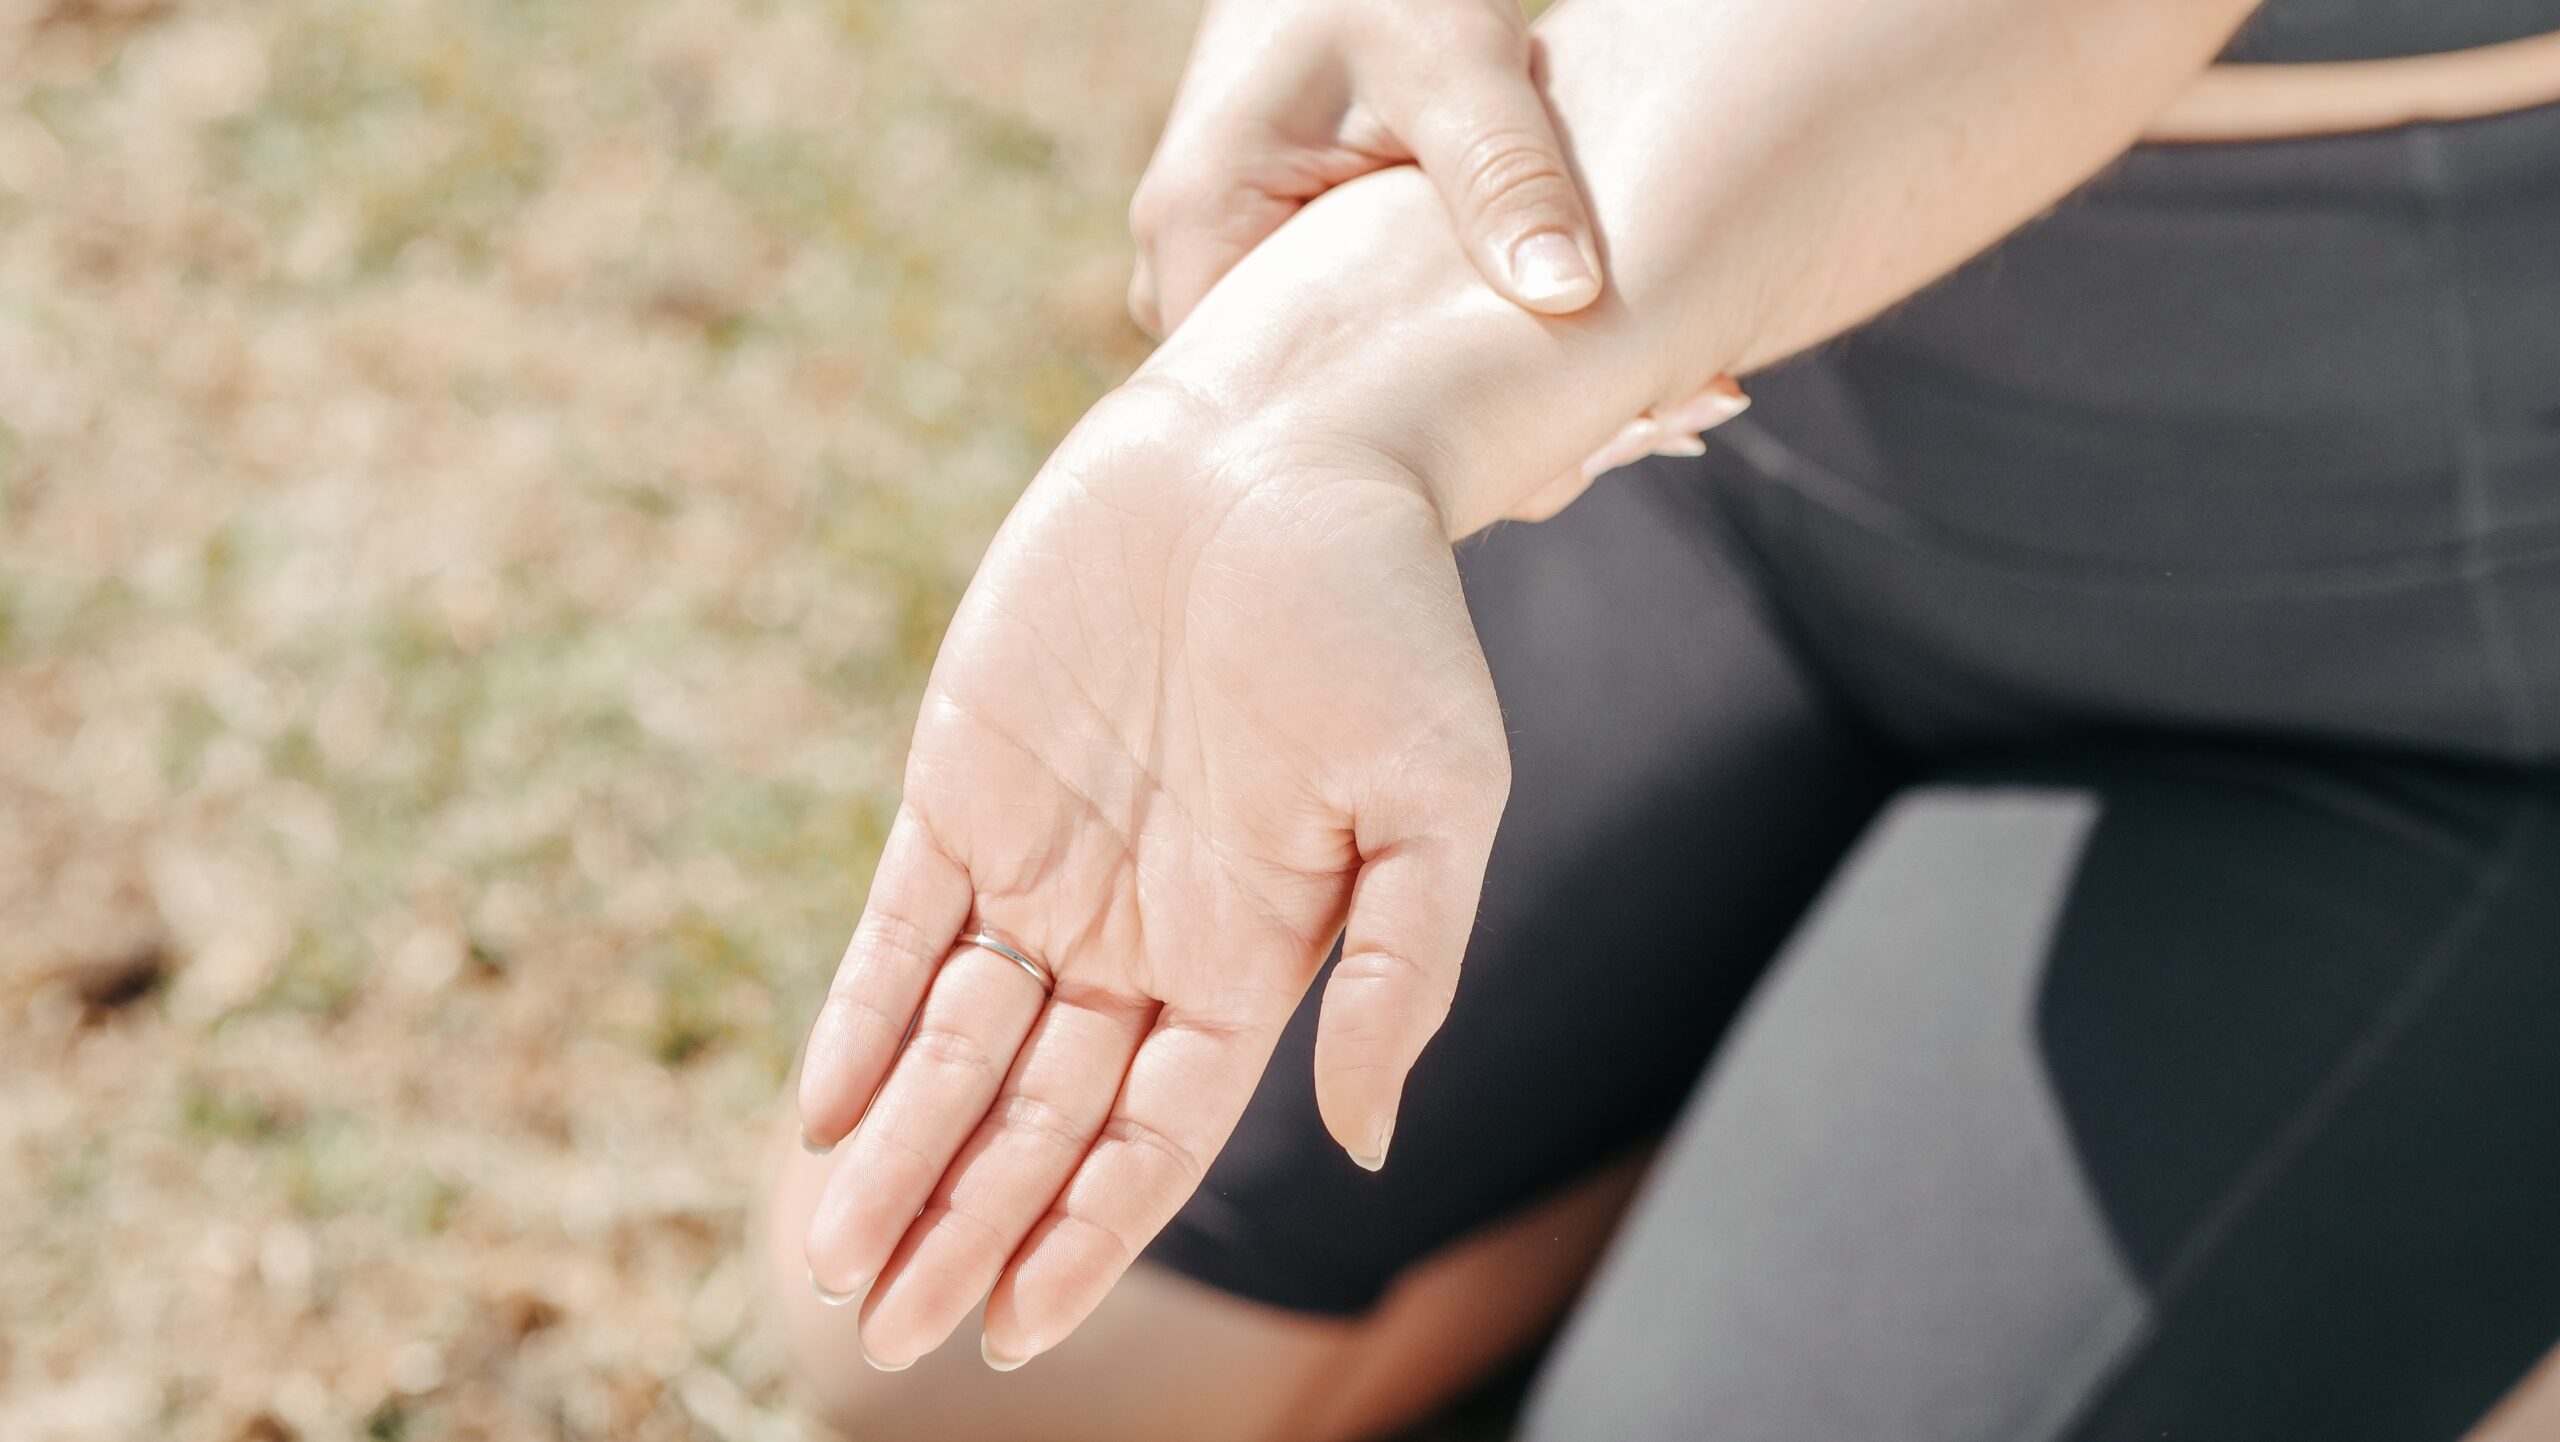 A person with Guillain-Barre syndrome holding her hand in pain